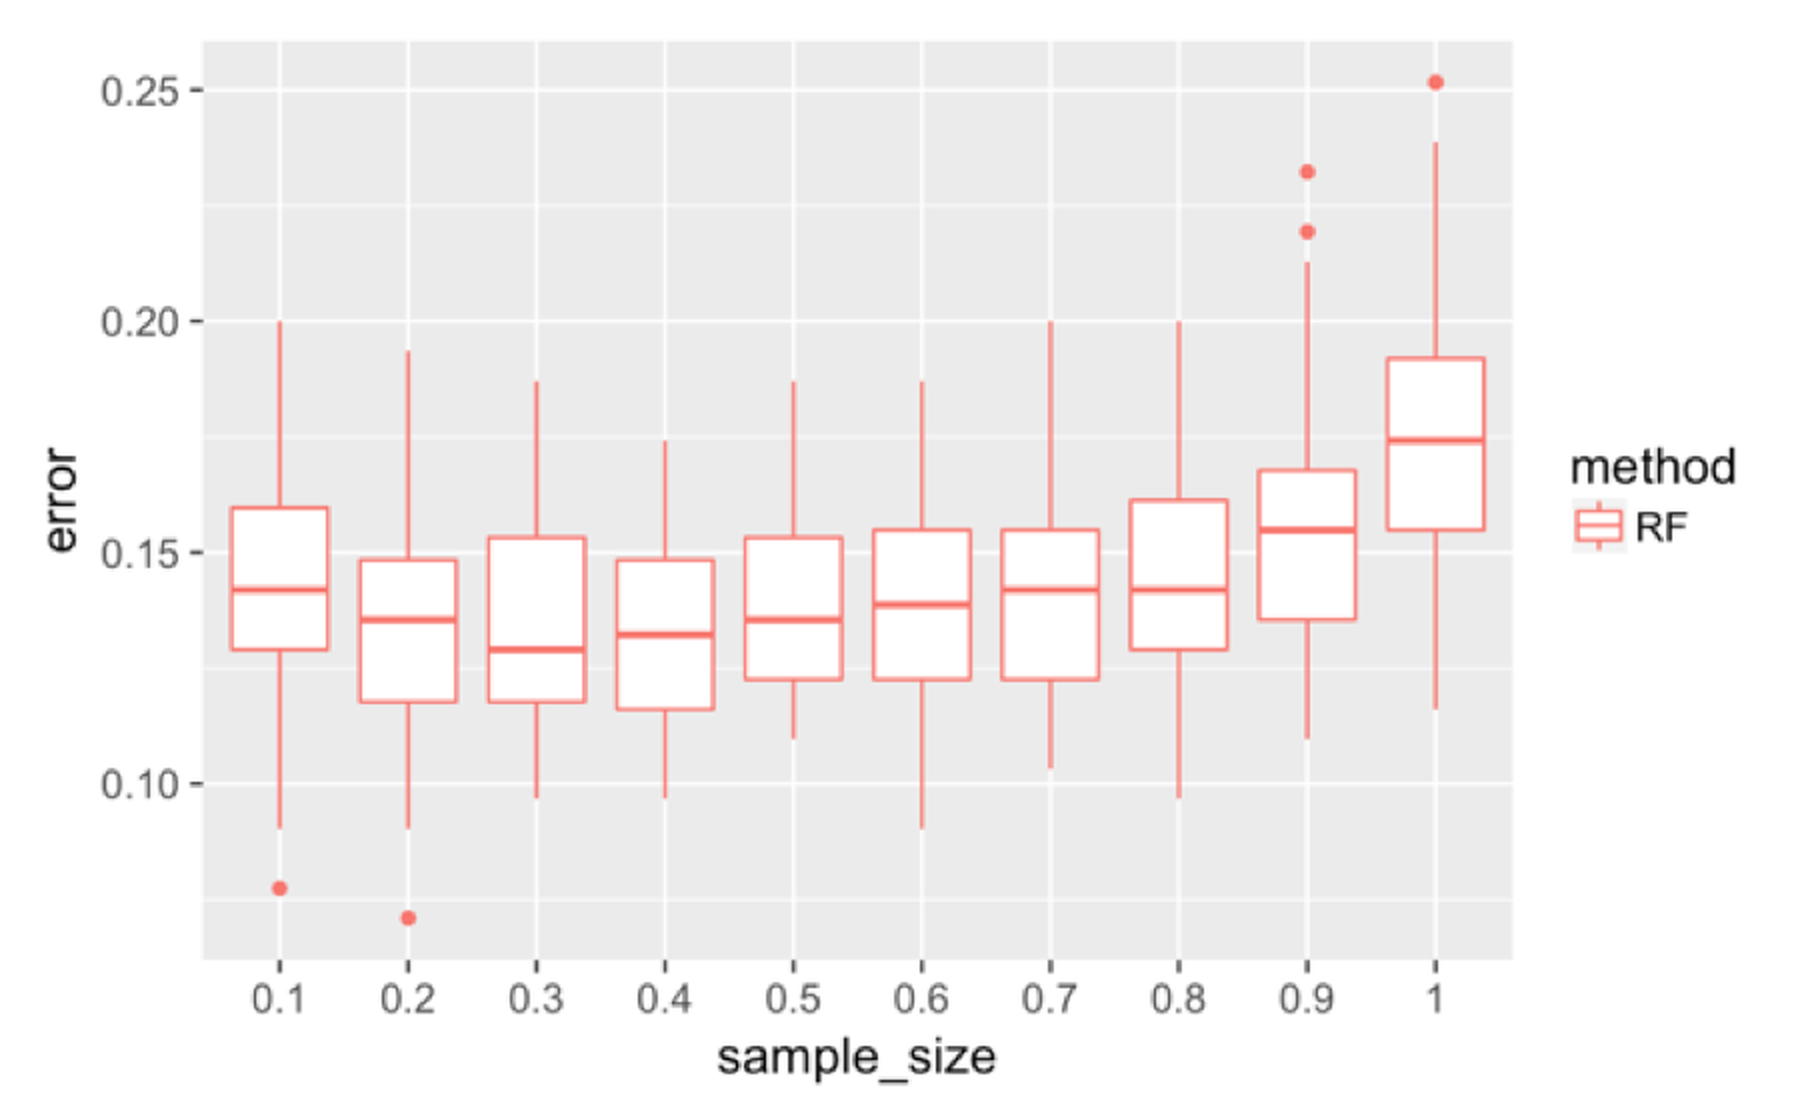  Boxplots of the classification error rates for random forest with a different sample sizes